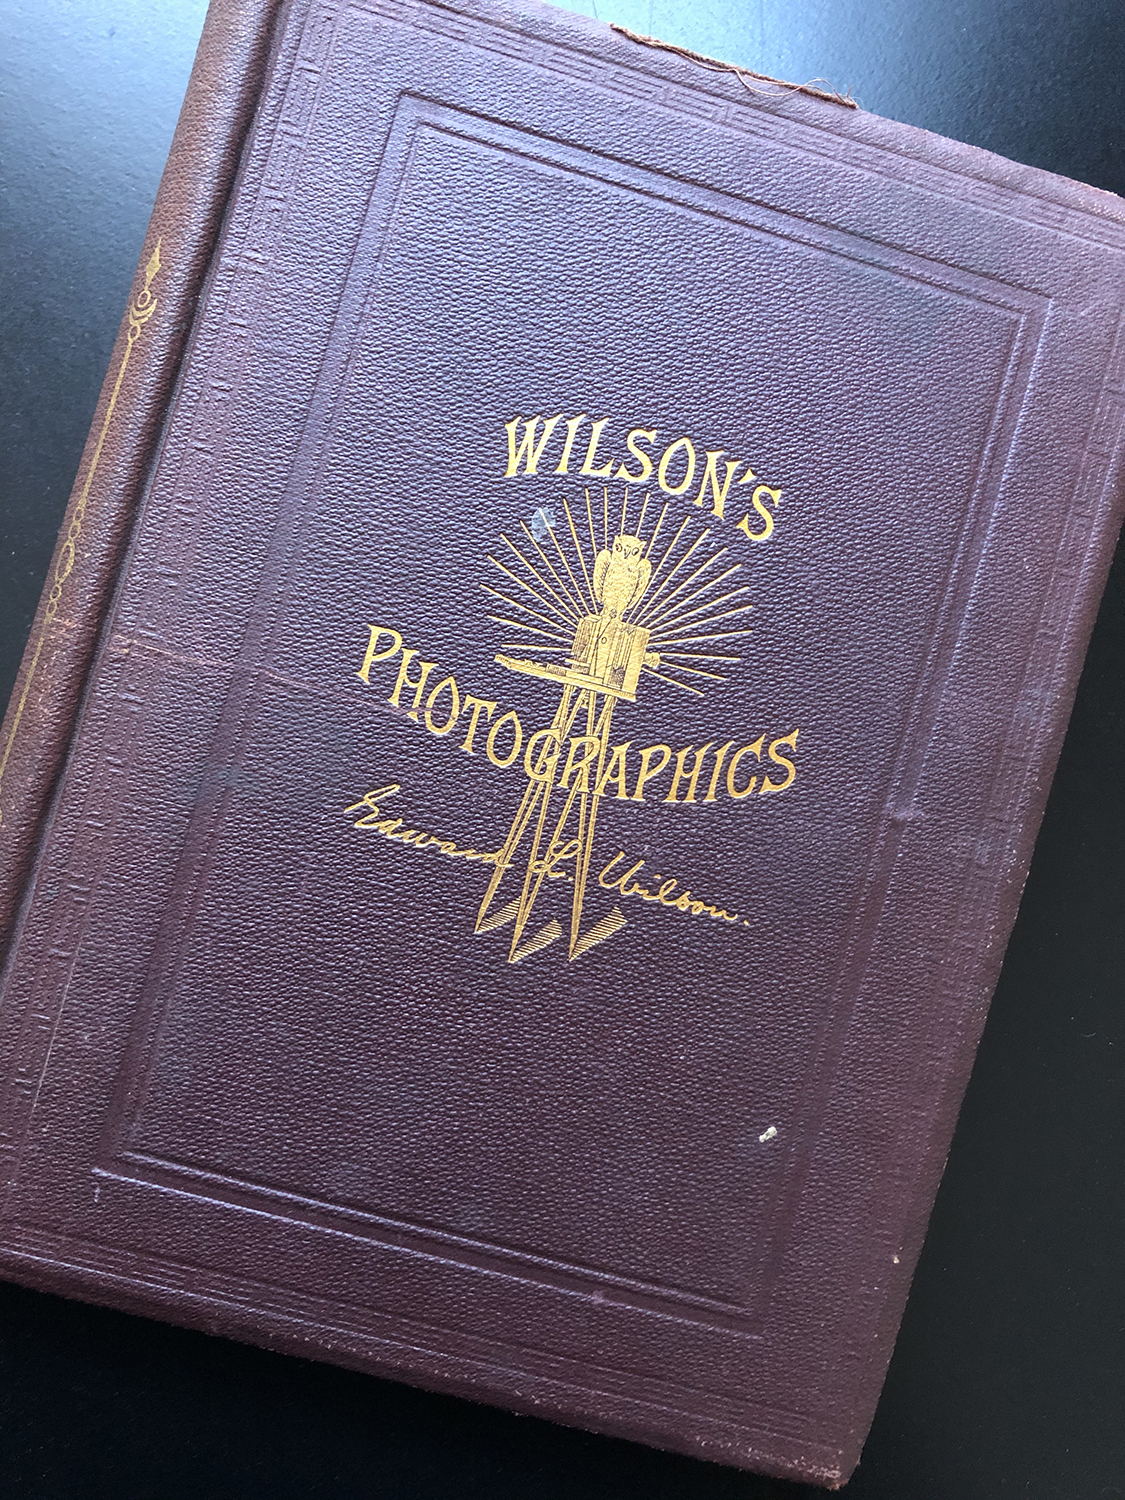 Cover of Wilson's Photographics, published 1881.